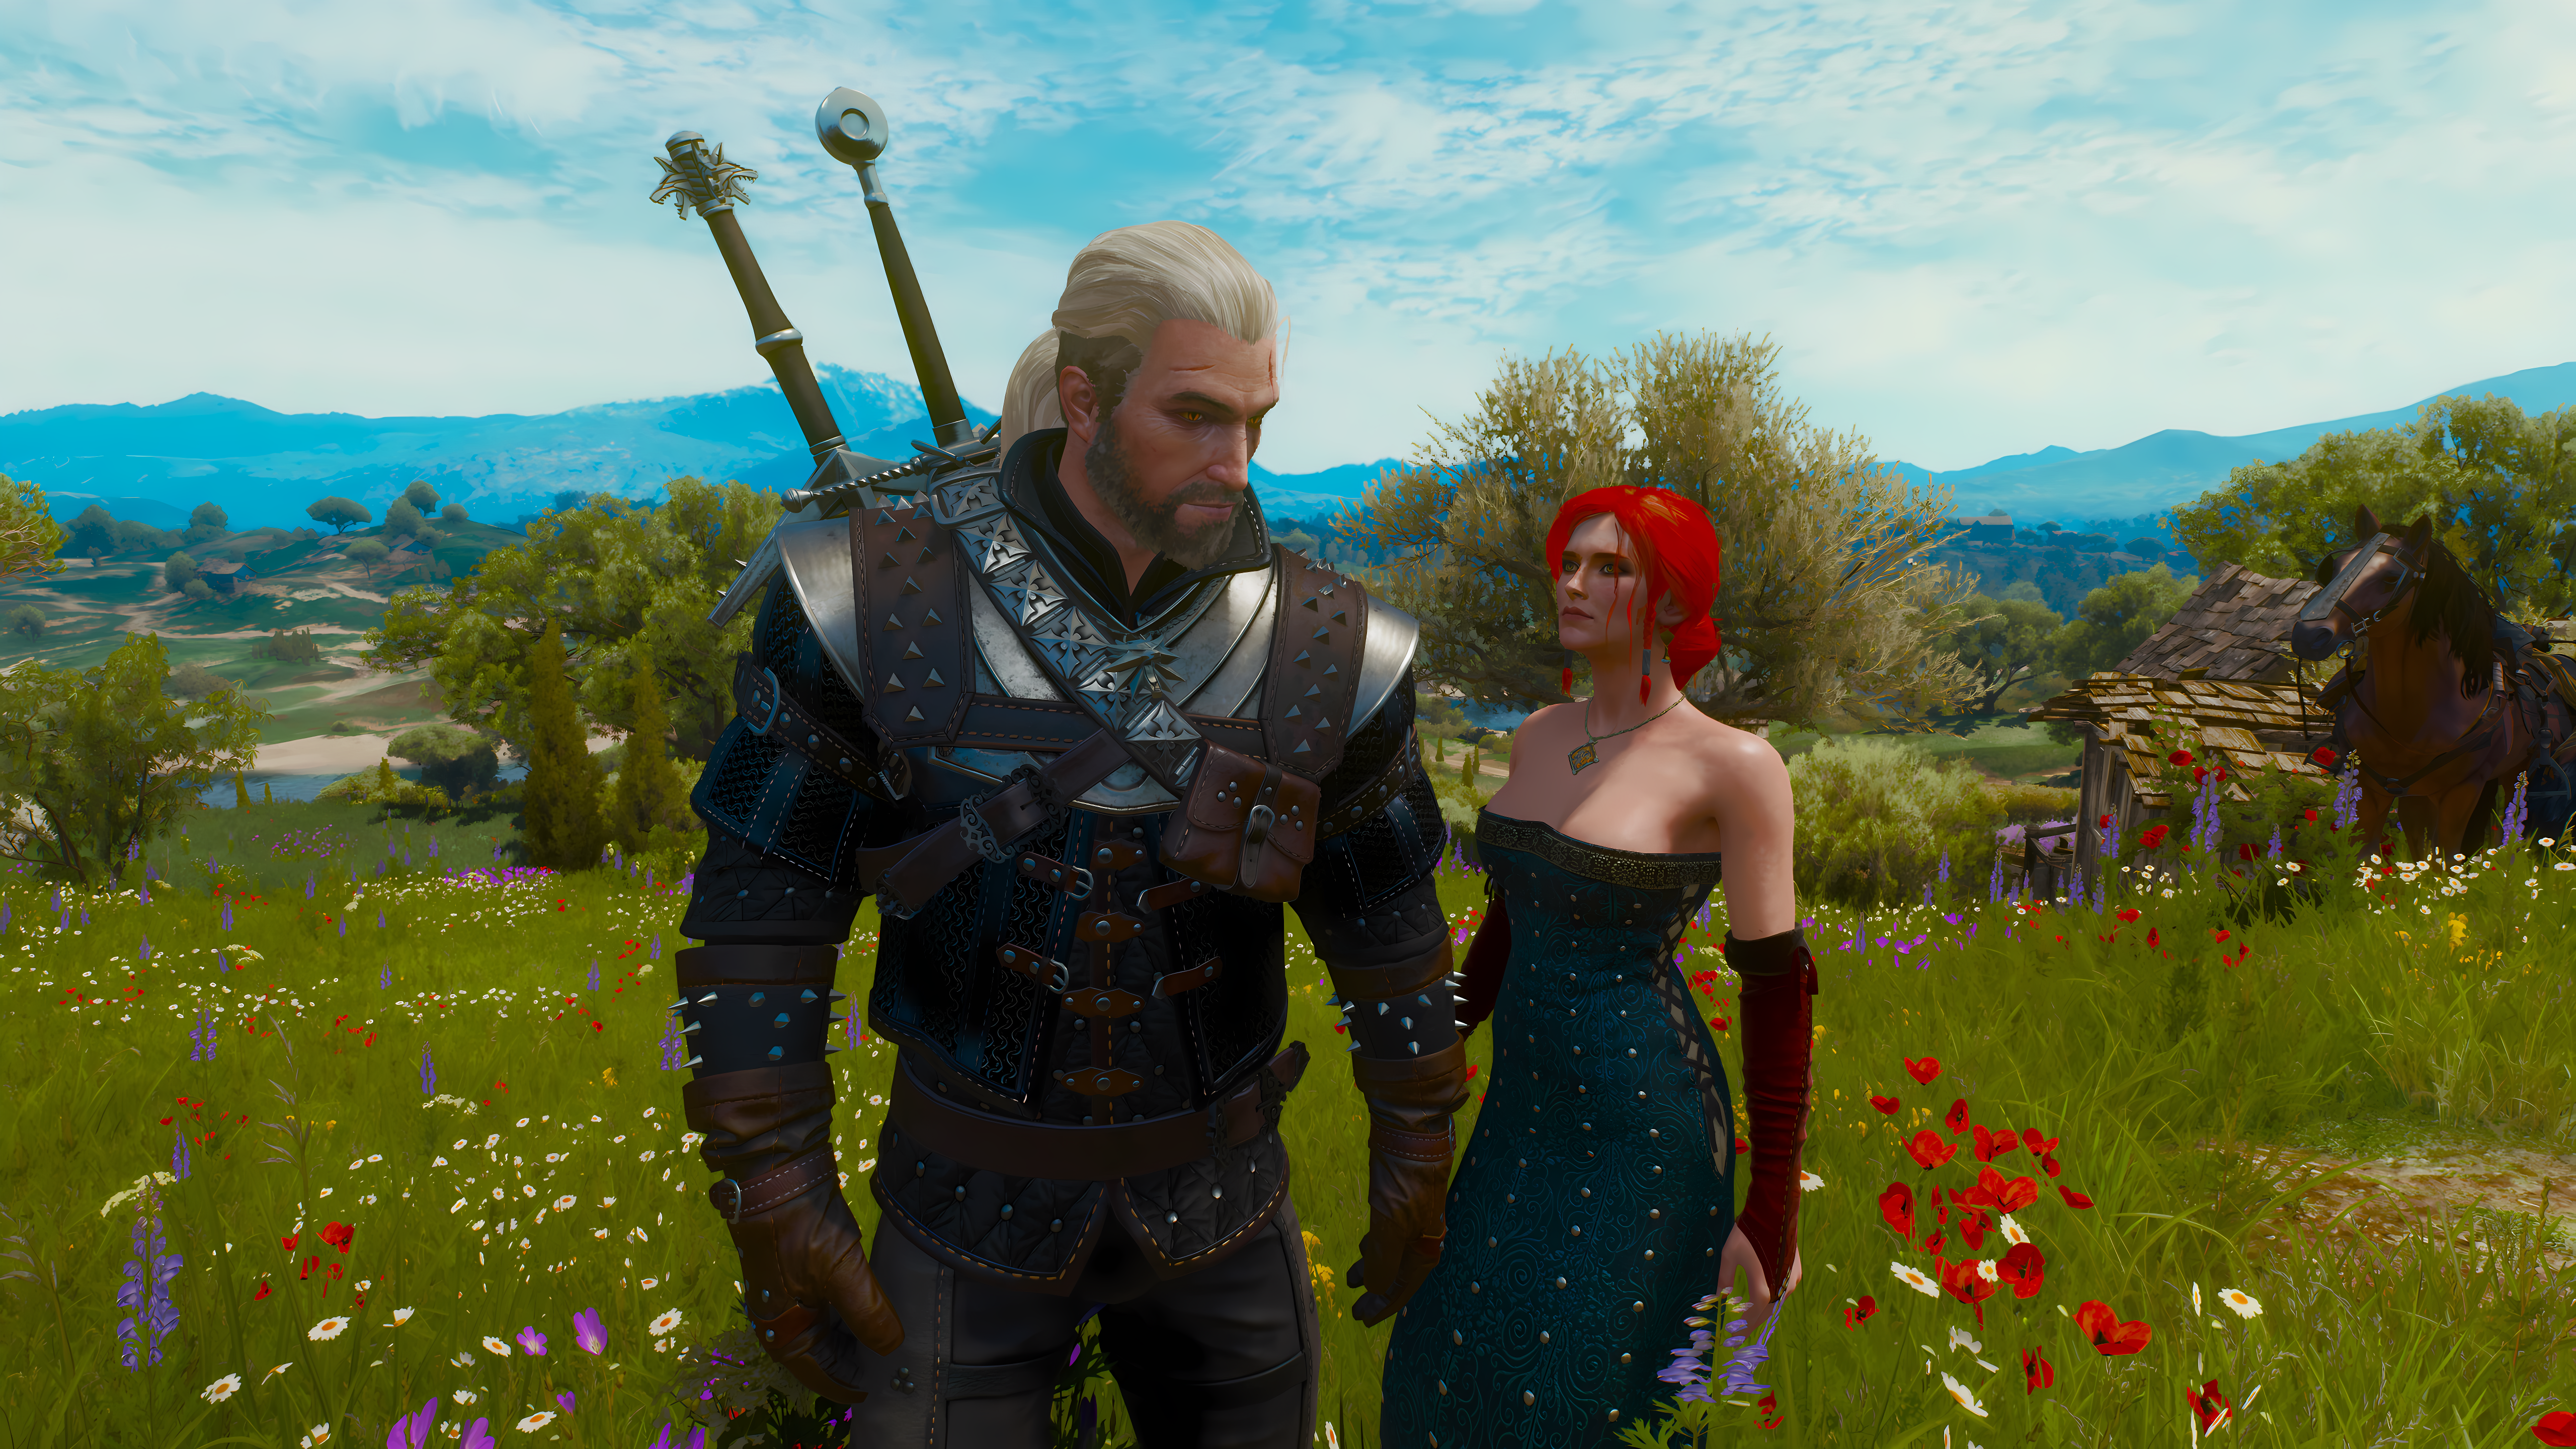 Anime 5120x2880 The Witcher 3: Wild Hunt Triss Merigold video games video game characters CGI flowers Geralt of Rivia Roach CD Projekt RED The Witcher 3: Wild Hunt - Blood and Wine